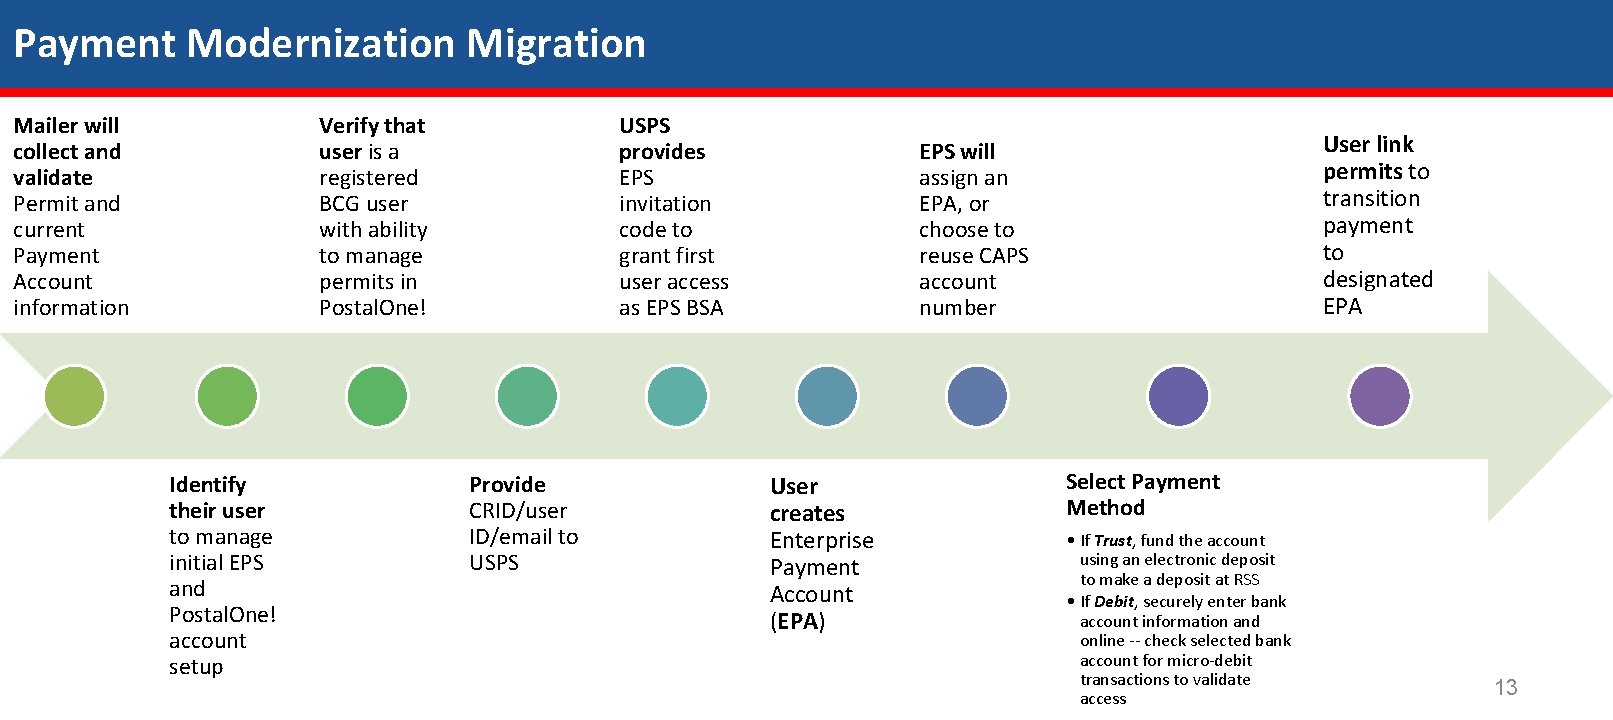 Payment Modernization Migration Mailer will collect and validate Permit and current Payment Account information